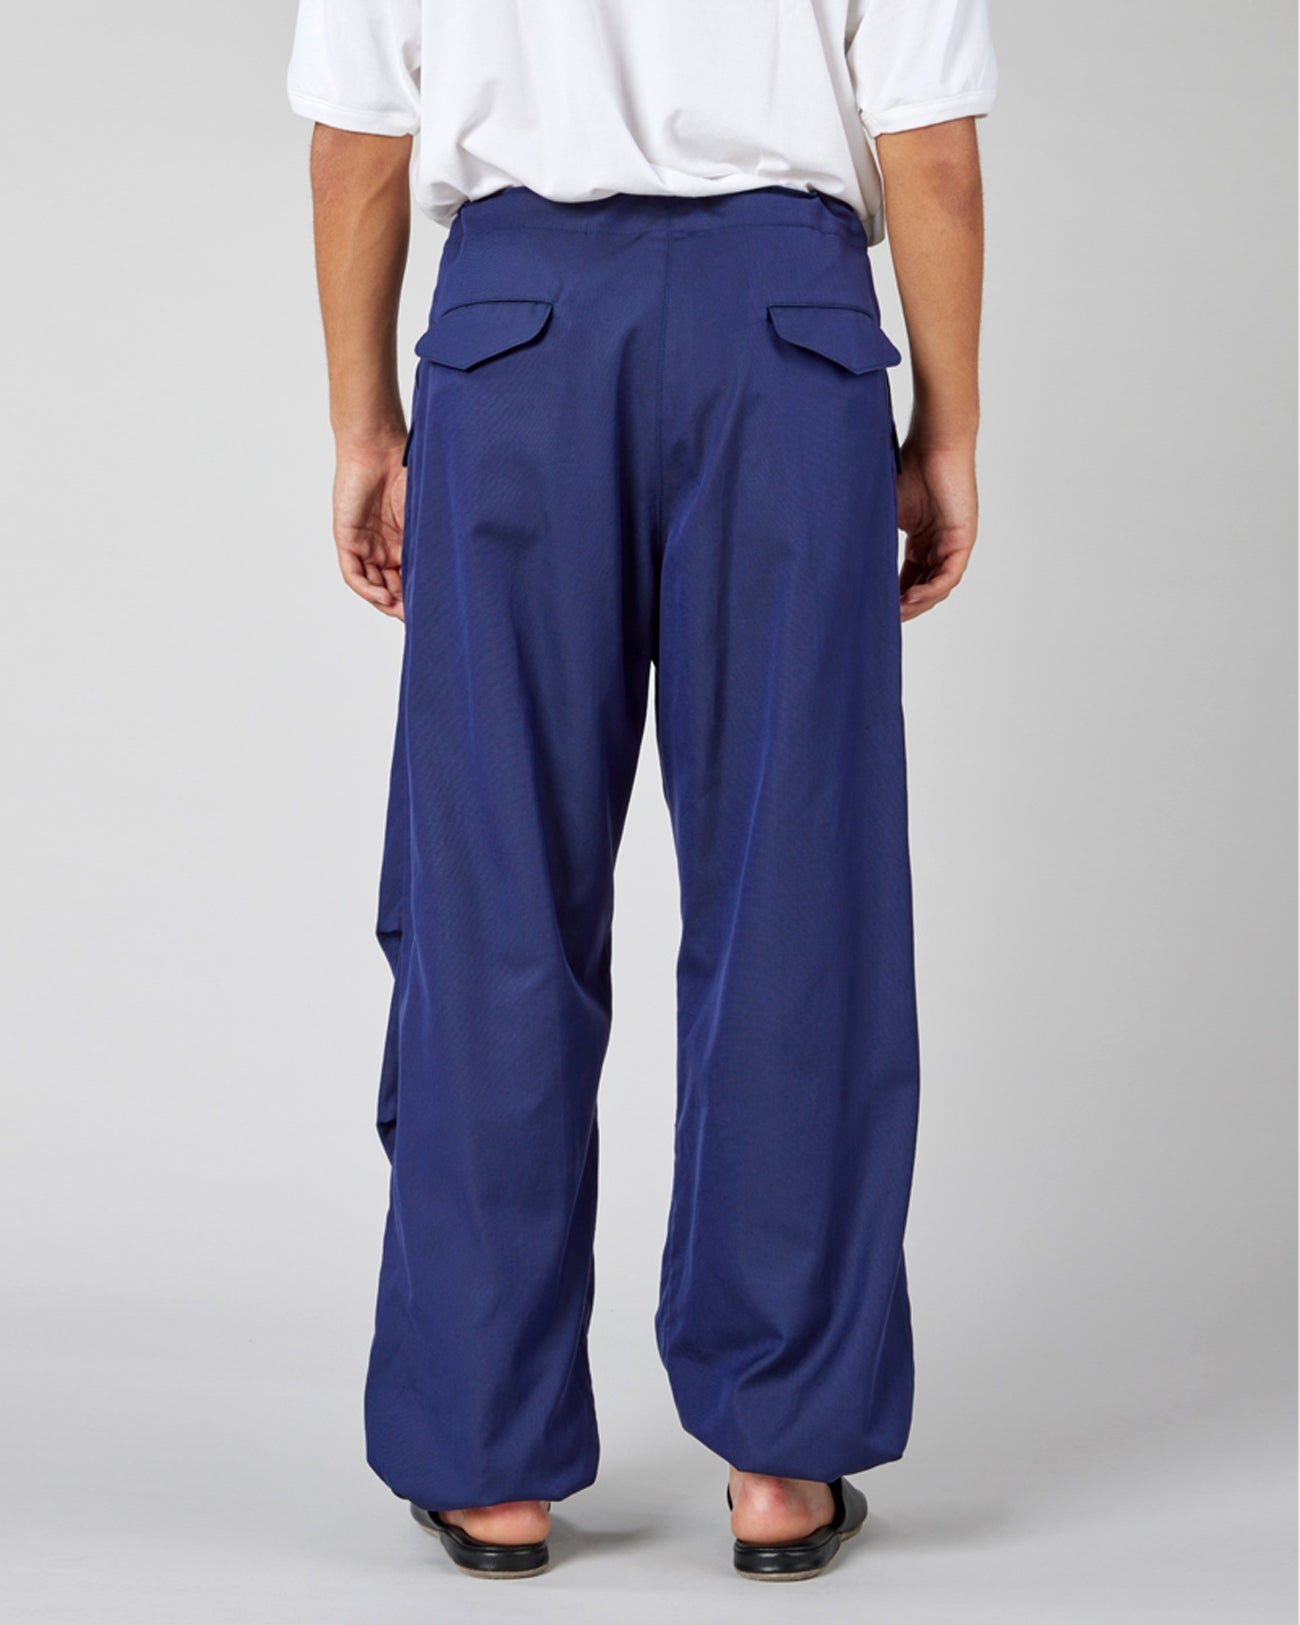 Finx OX New M65 Trousers - navy - FAB4 ONLINE STORE